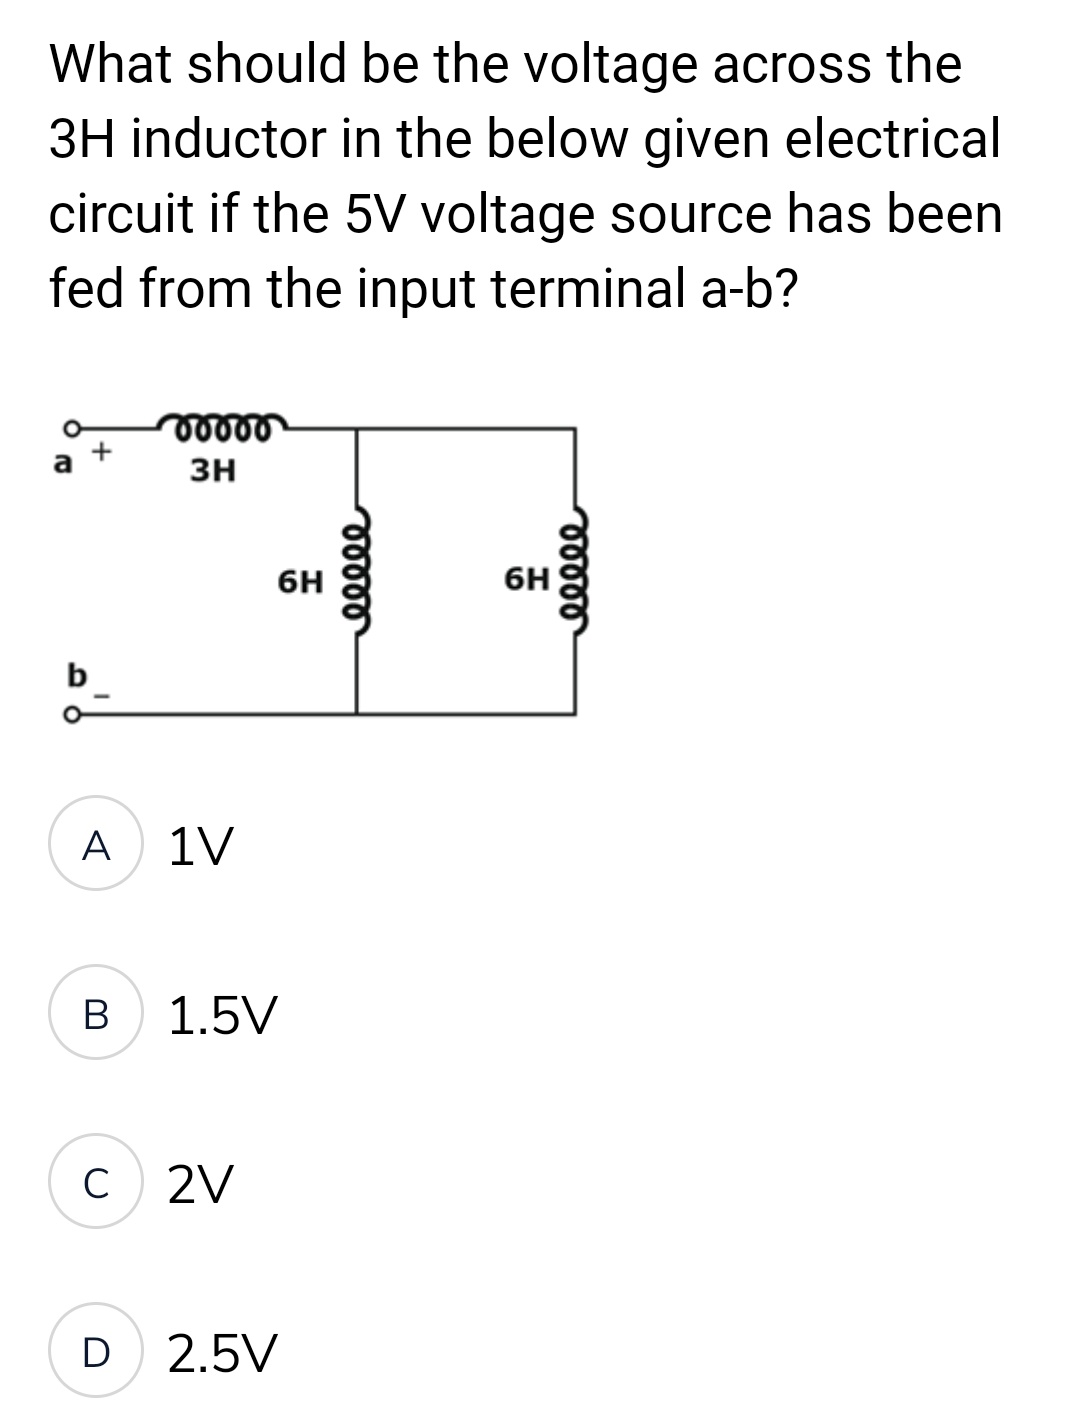 What should be the voltage across the
3H inductor in the below given electrical
circuit if the 5V voltage source has been
fed from the input terminal a-b?
vooro
3H
b
6H
A
1V
B
1.5V
C
2V
D 2.5V
eeeee
6H
eeeee